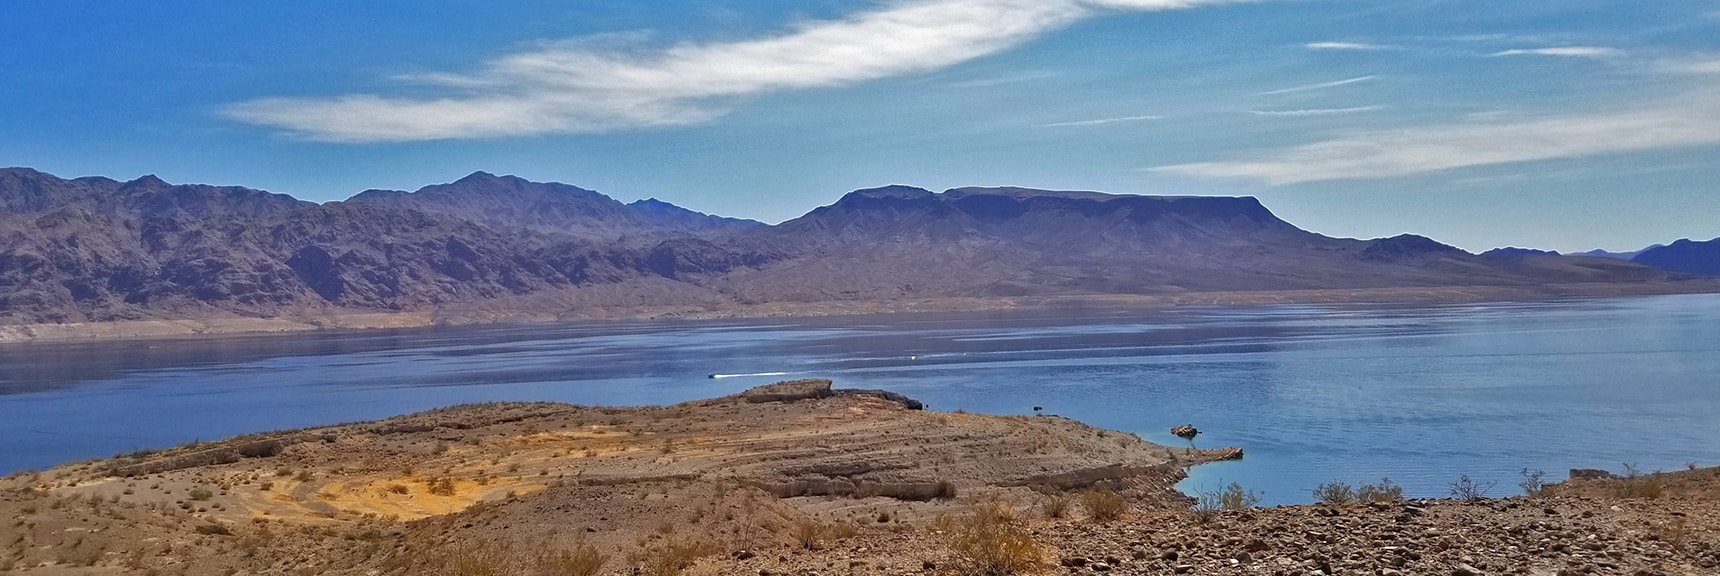 Black Mountains, Fortification Hill, Lake Mead | Callville Summit Trail | Lake Mead National Recreation Area, Nevada